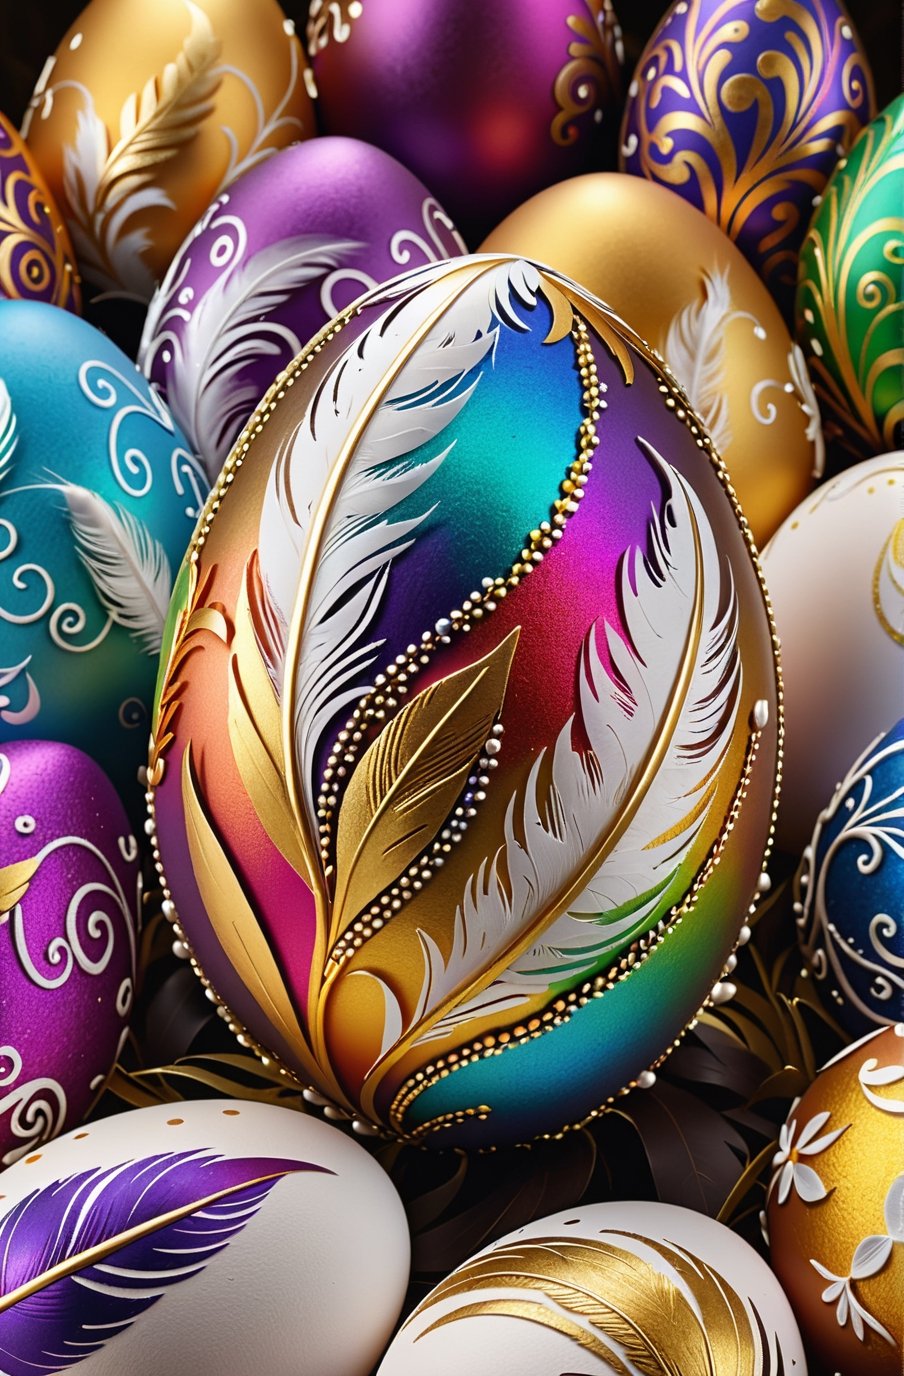 Easter eggs designed with arabesques and swirls using a harmonious mix of rainbow colors.
A pile of tiny golden twigs and many white feathers cover the egg from the bottom as if protecting it.
The egg shines even brighter due to the intense lighting that illuminates the egg on a dark plnk and golden background.

Ultra-clear, Ultra-detailed, ultra-realistic, ultra-close up